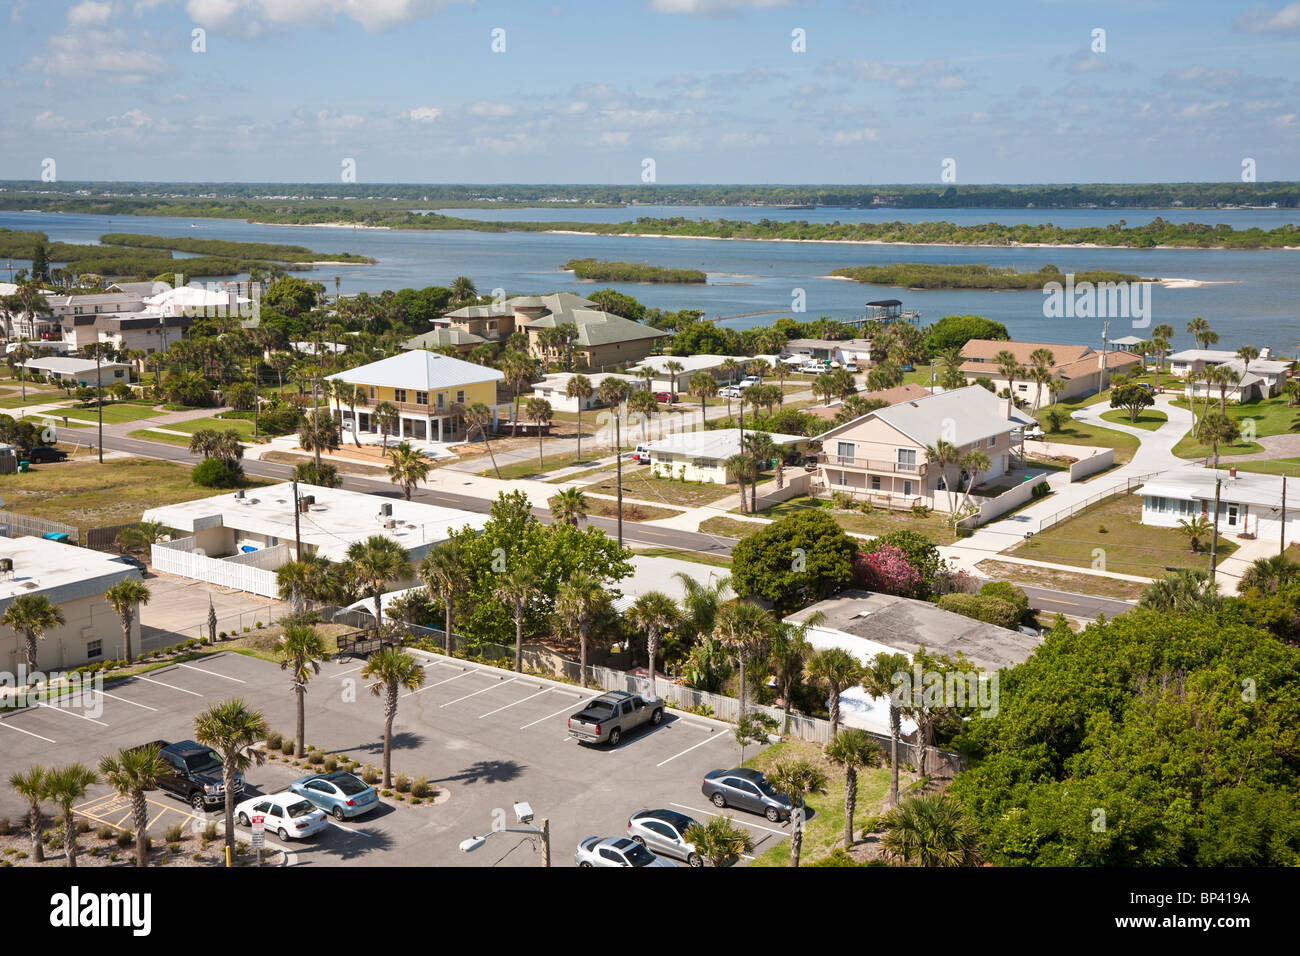 Private rental and residential homes along the Intracoastal Waterway in Daytona Beach Shores, Florida Stock Photo